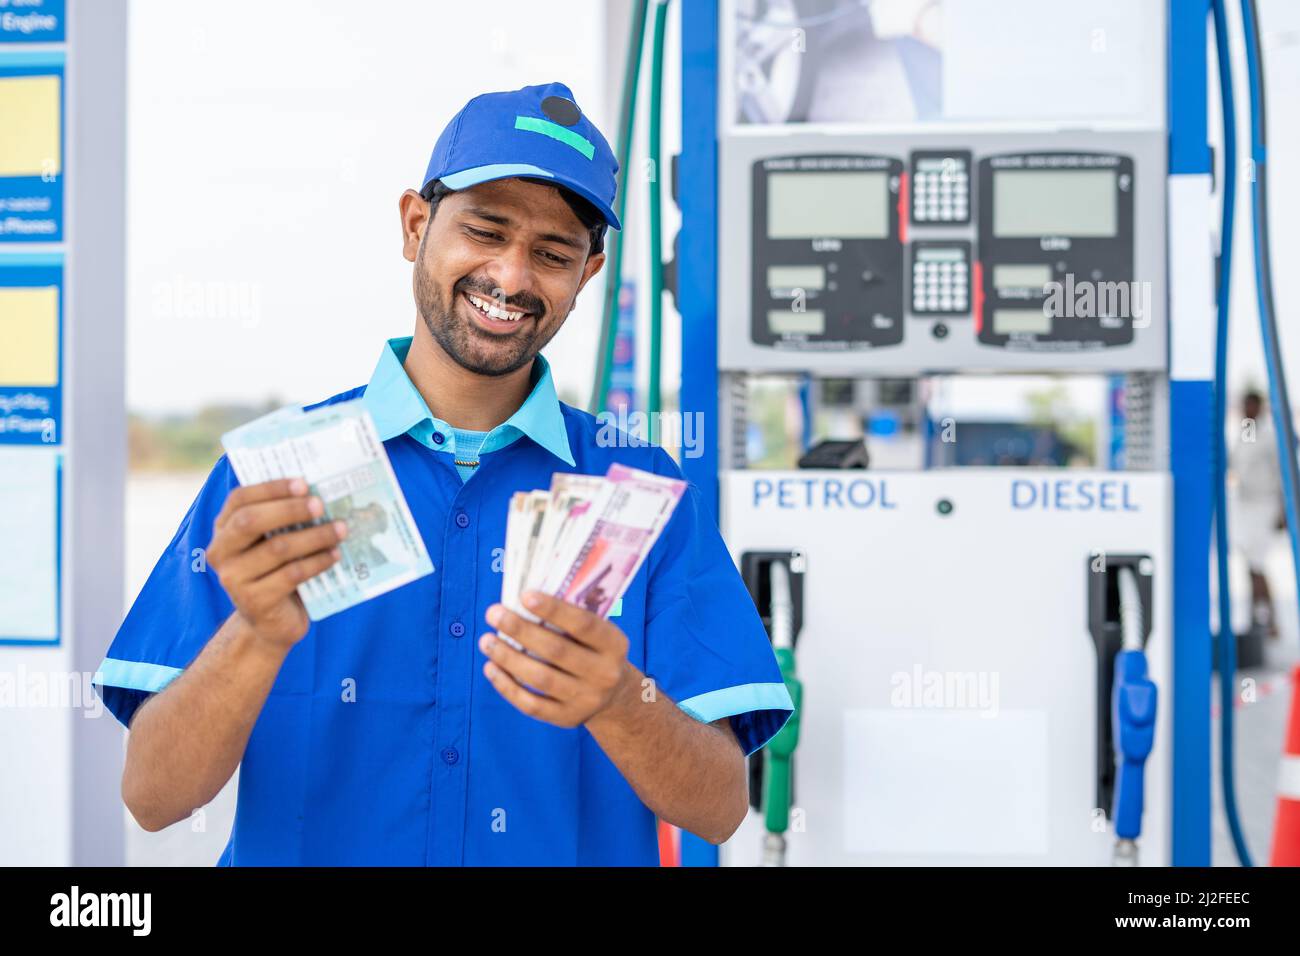 Smiling gas filling station attendant counting money at petrol pump - concept of business profit, earnings, salary and finance Stock Photo